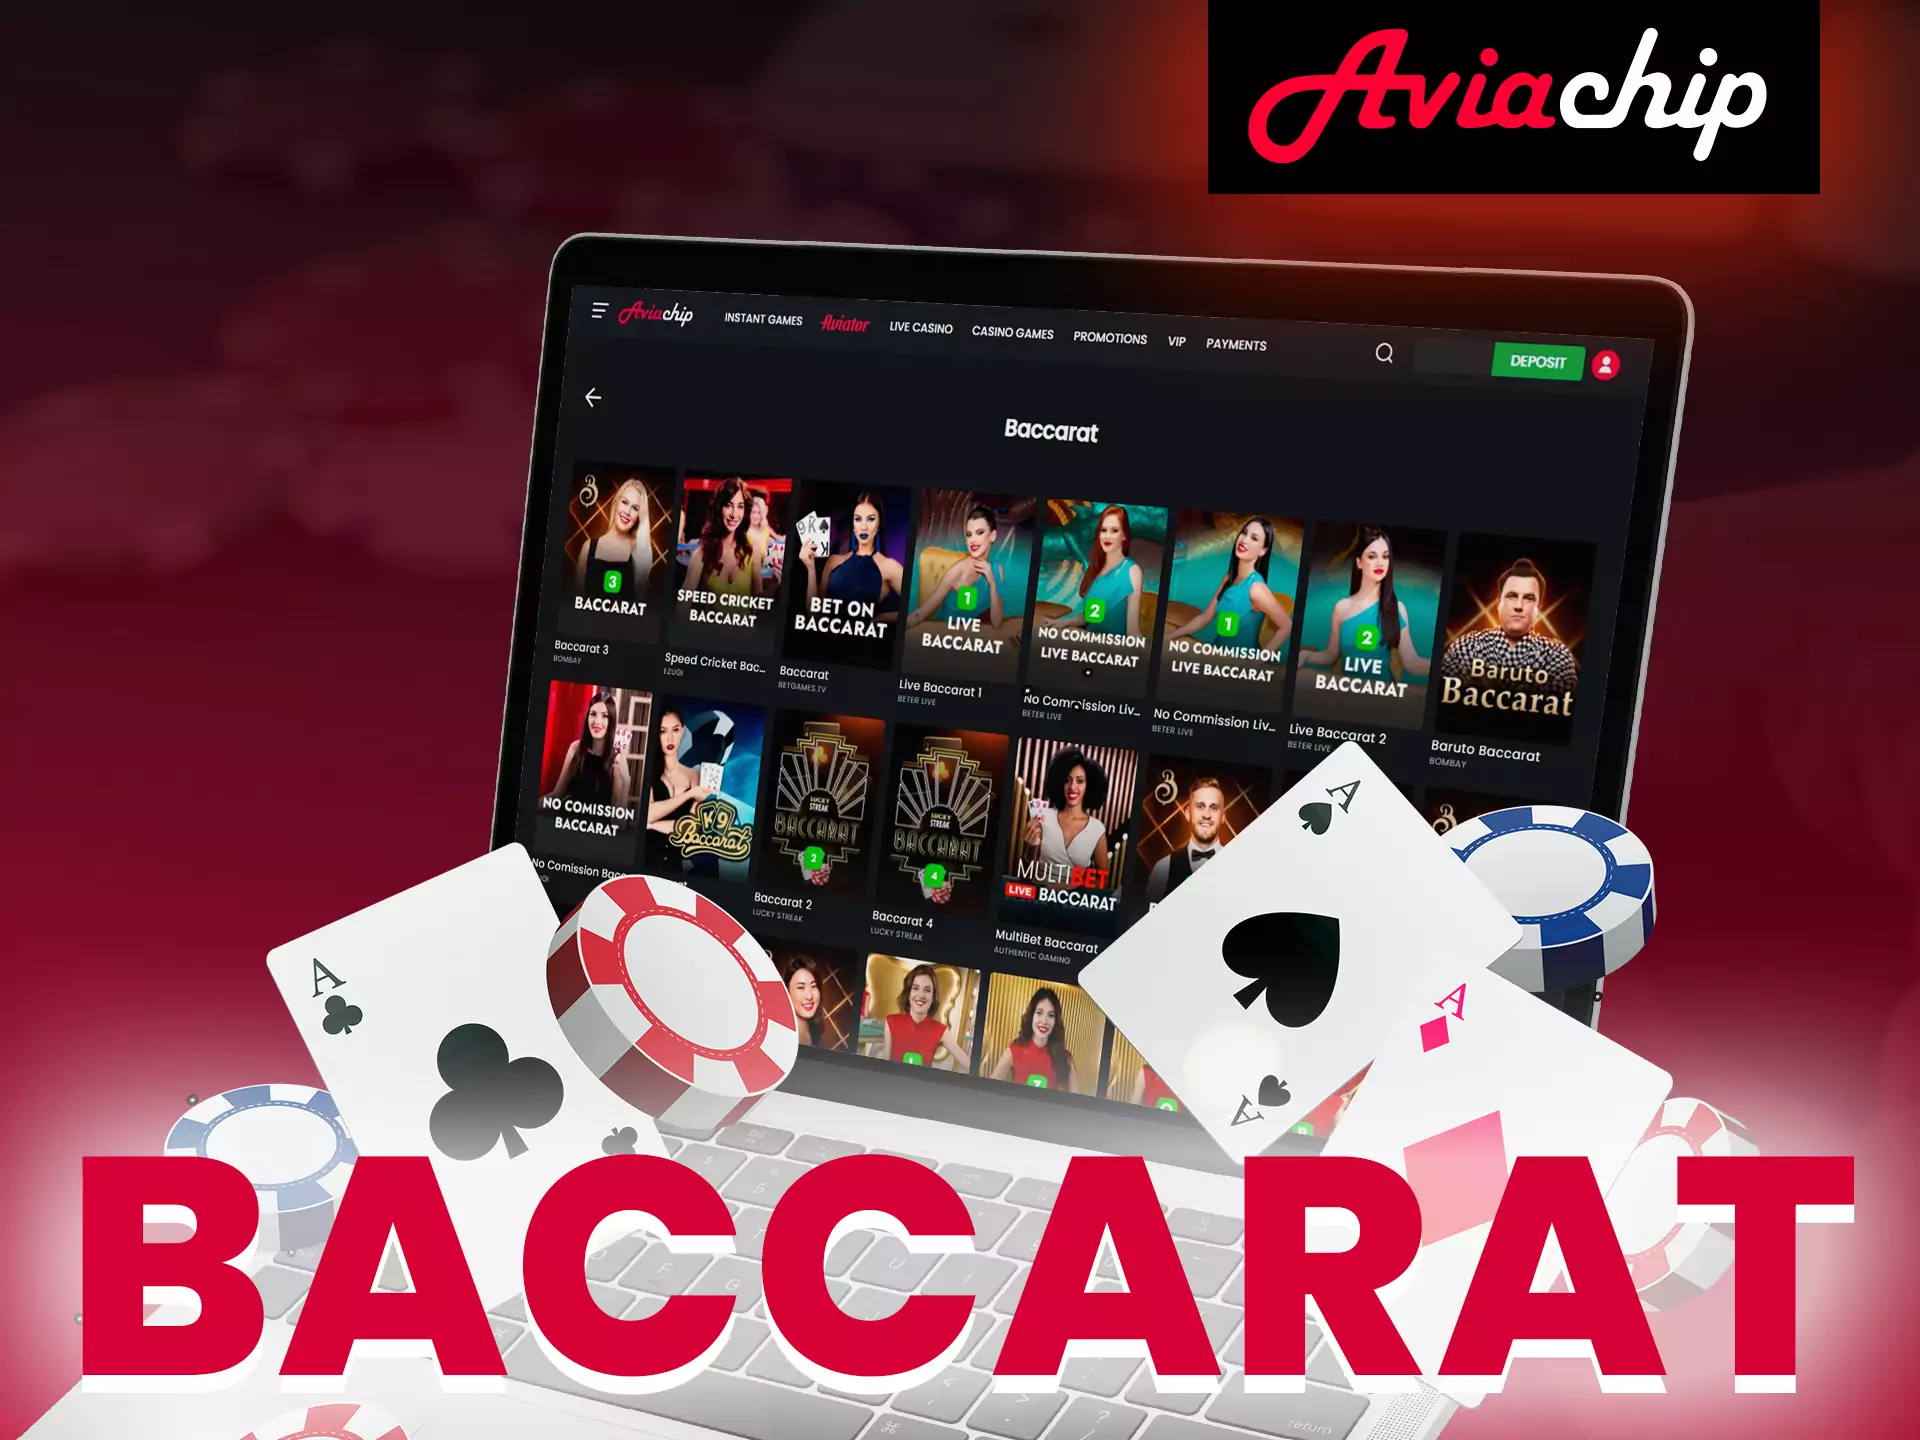 On Aviachip you can play baccarat.